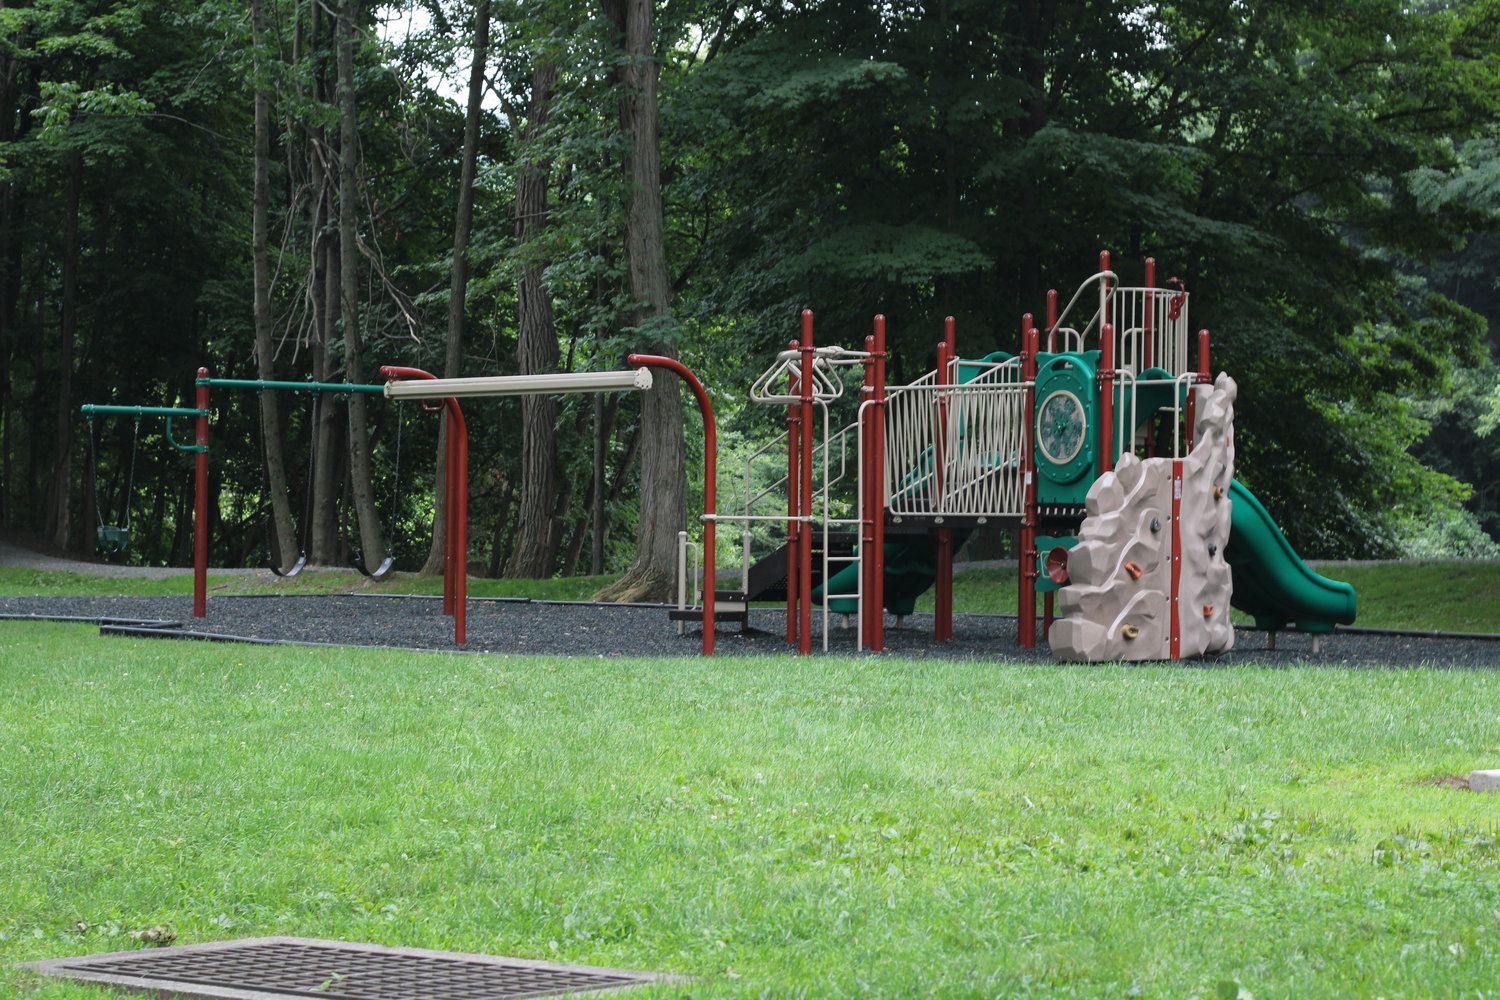 Improvements are being planned for the playground at the former site of Stourbridge Elementary.